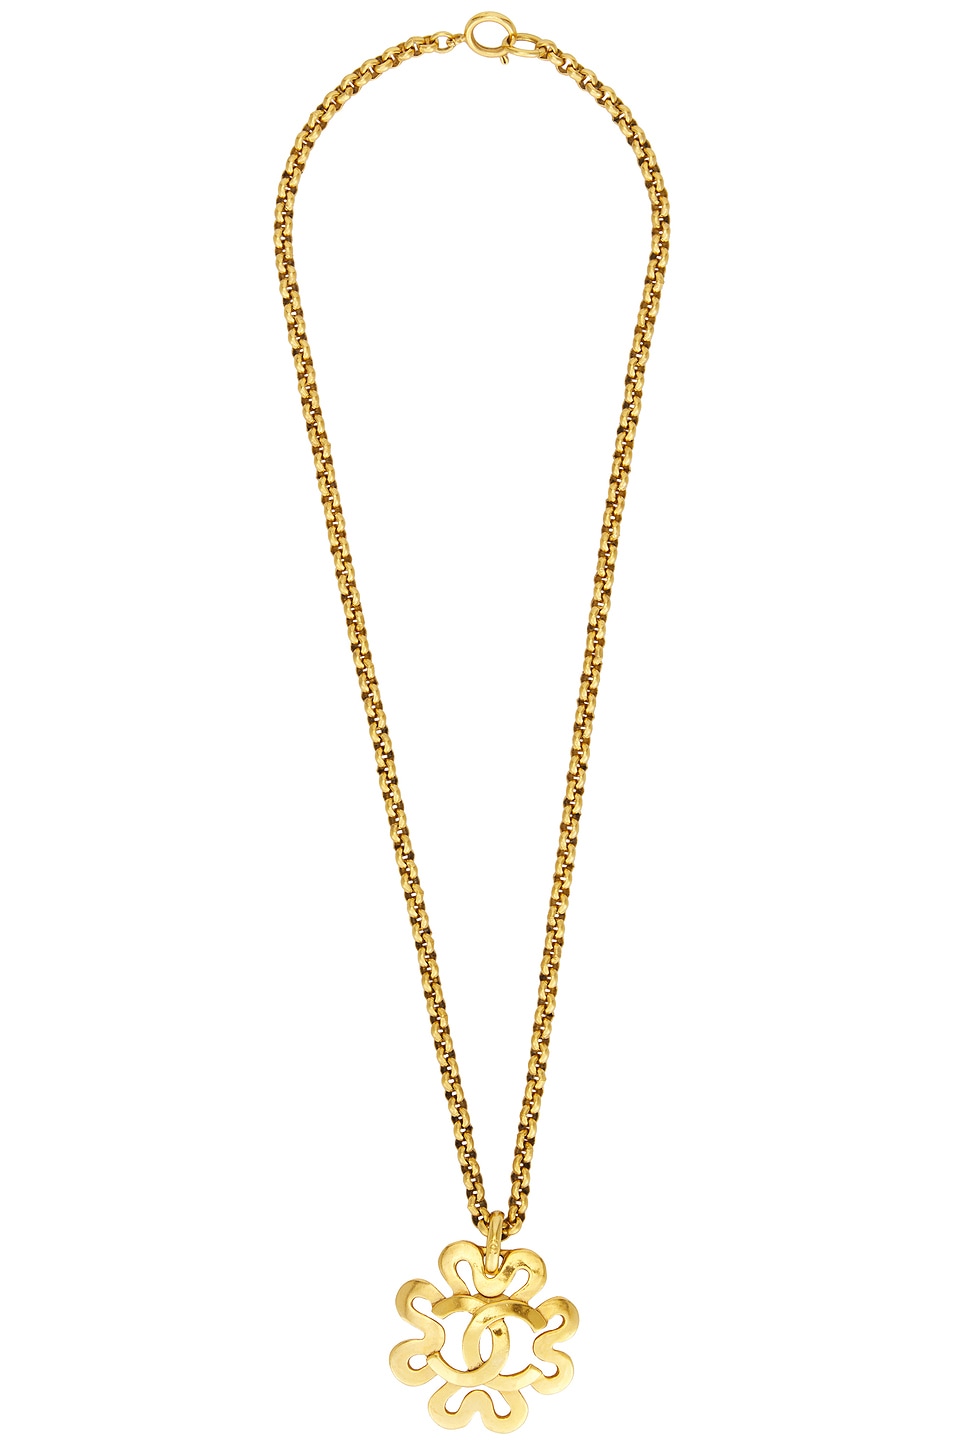 Image 1 of FWRD Renew Chanel Coco Mark Pendant Necklace in Gold